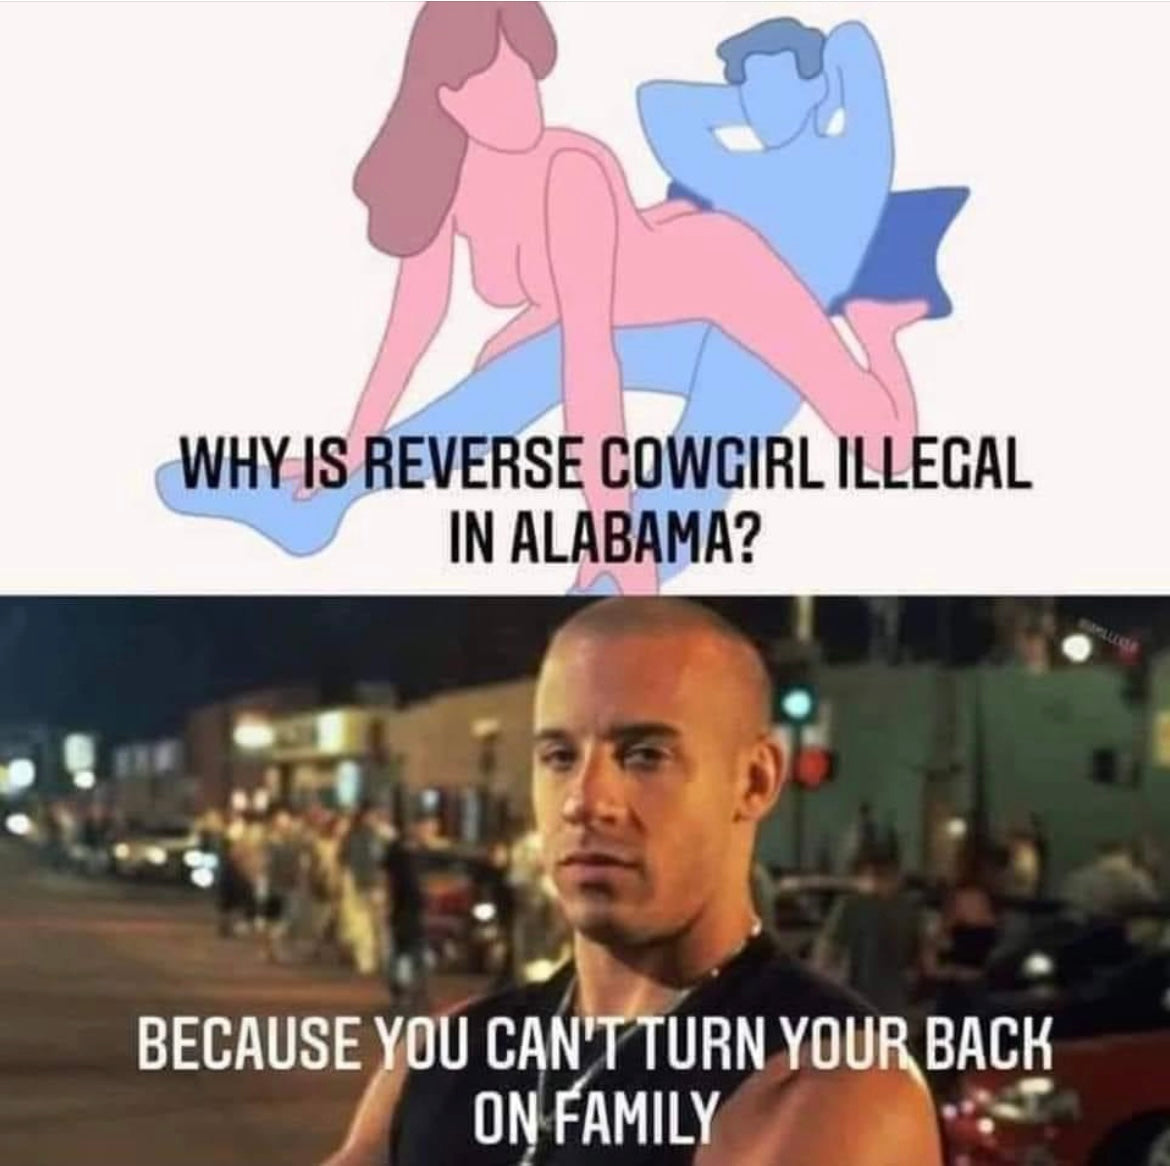 Why is reverse cowgirl illegal in Alabama? Some humor for your day. UnmincedWords.com